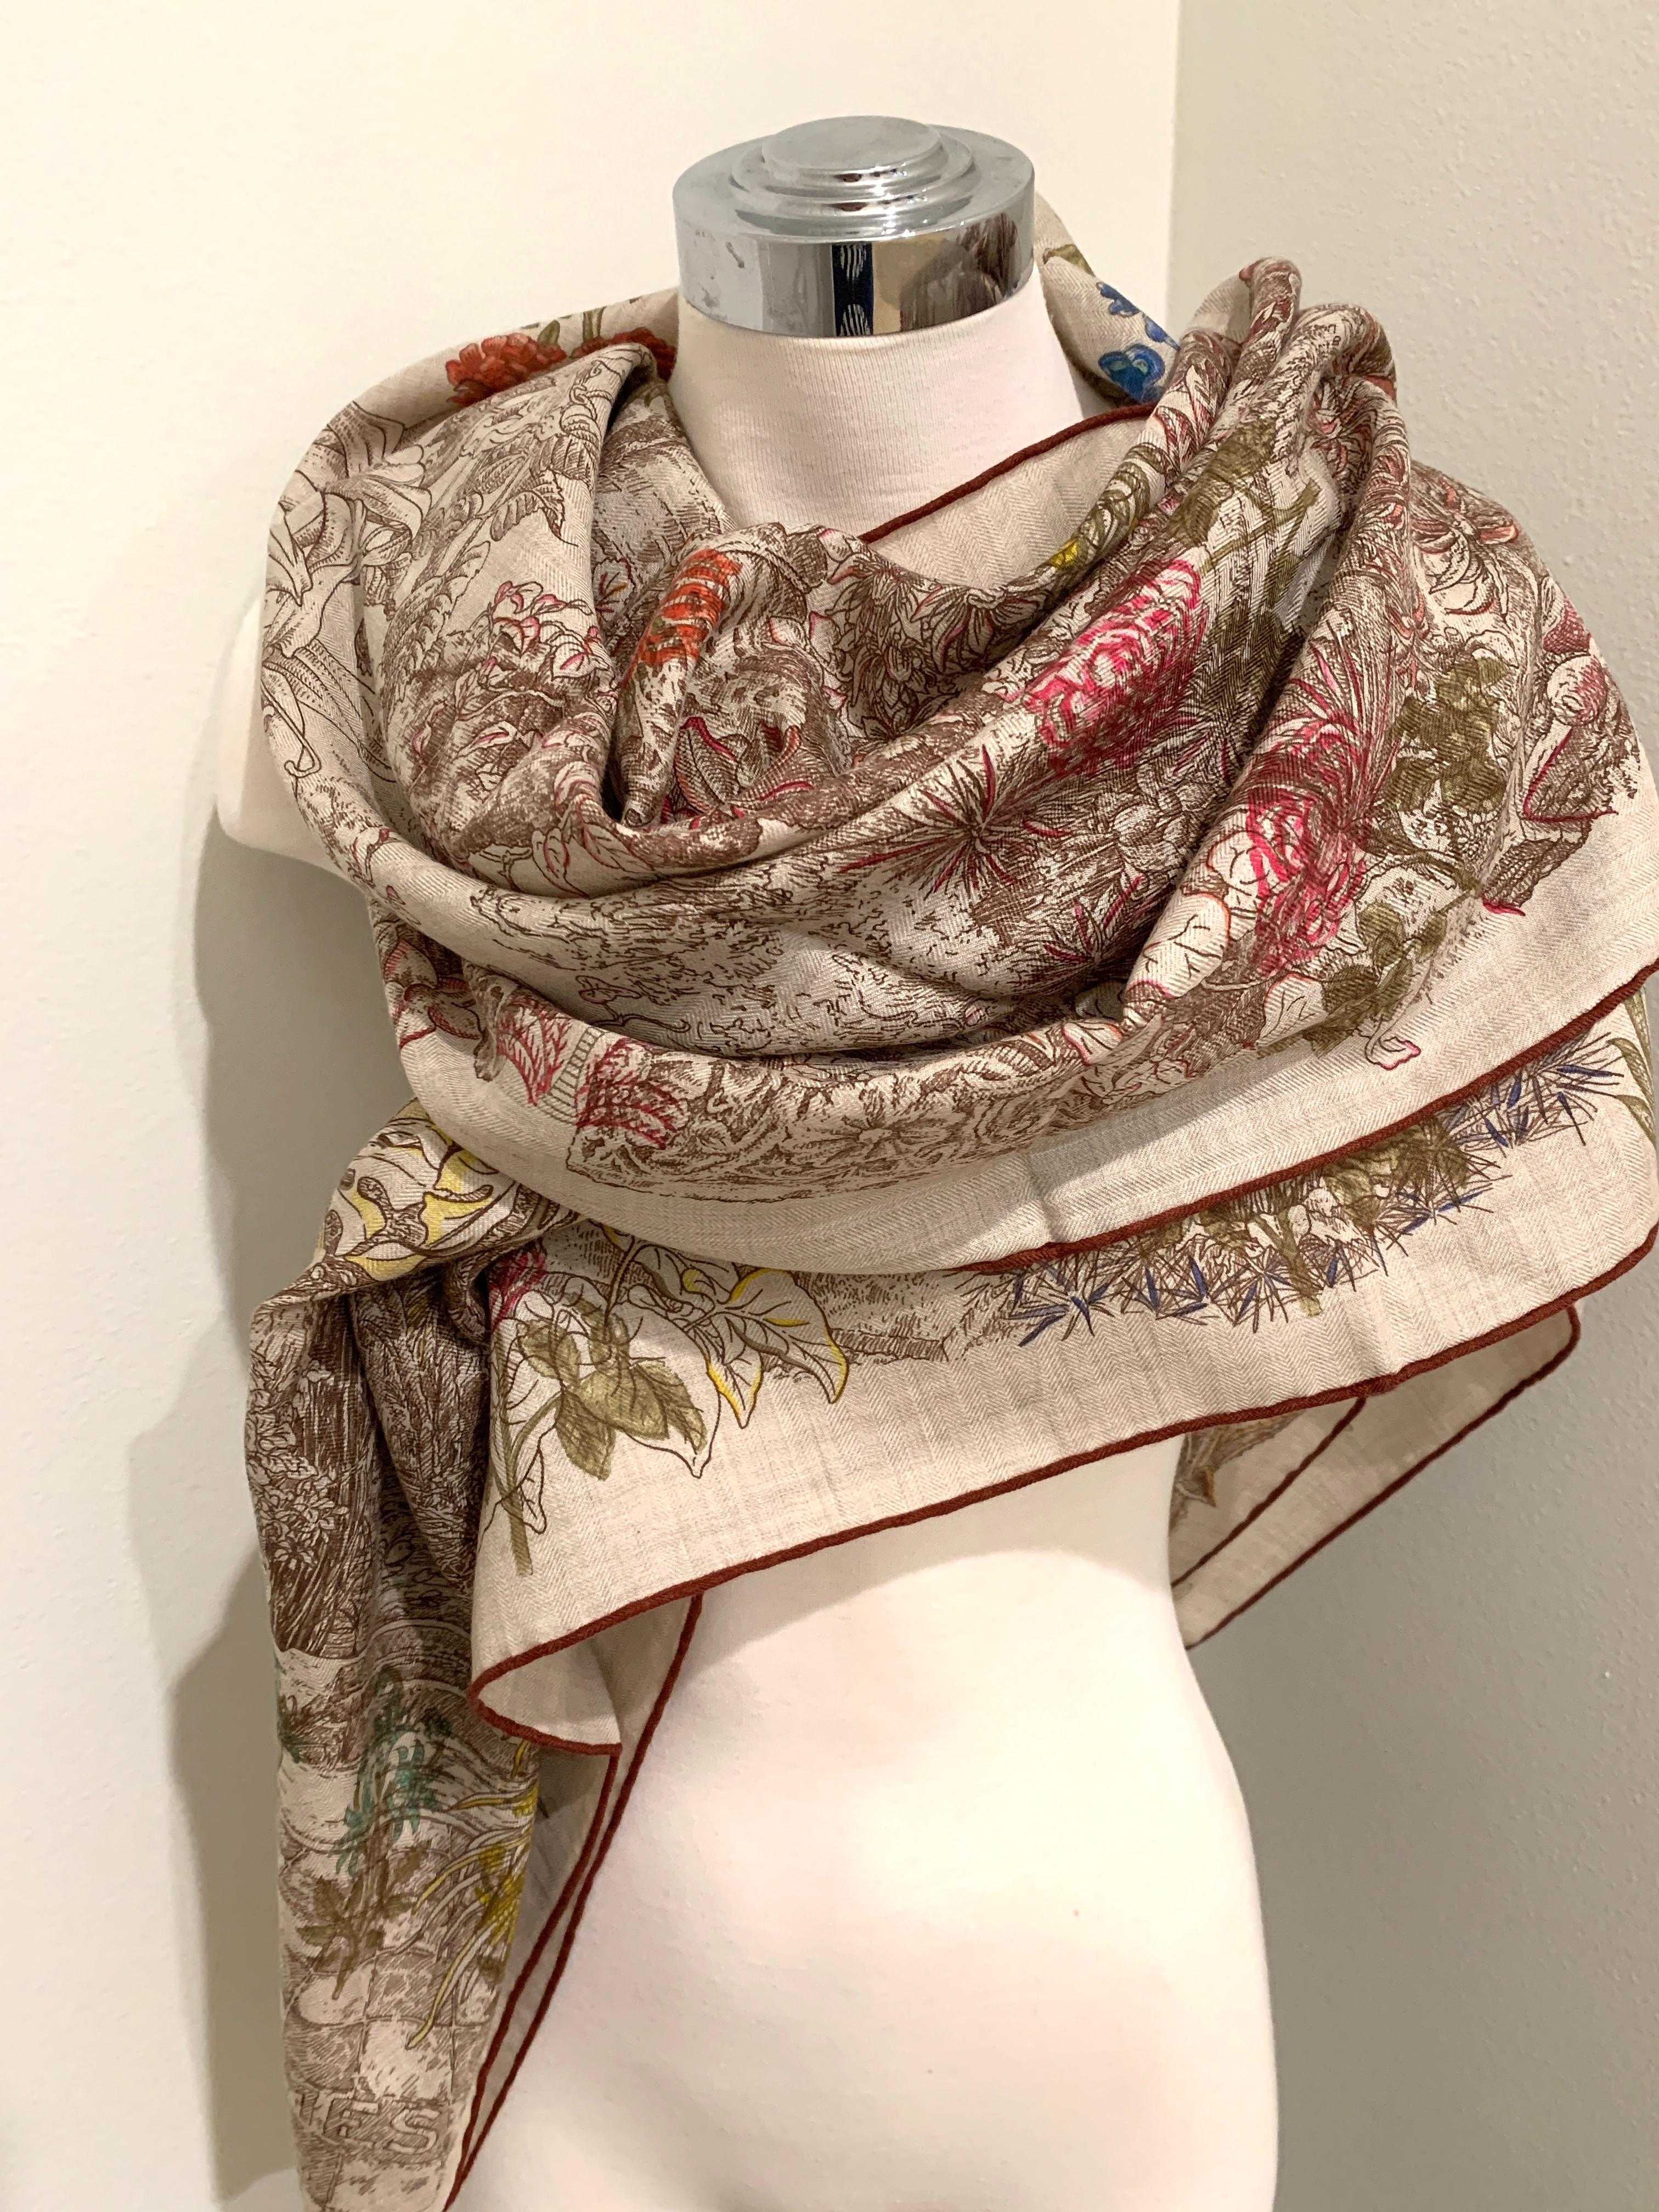 Hermes cashmere and silk shawl (70% cashmere and 30% silk)

Hermes Cashmere and Silk Shawl
Le Jardin de Leila au Bloc
Artiste: Francois Houtin
Printed on cashmere and silk material, this giant scarf is supple, light and easy to wear. It’s the ideal